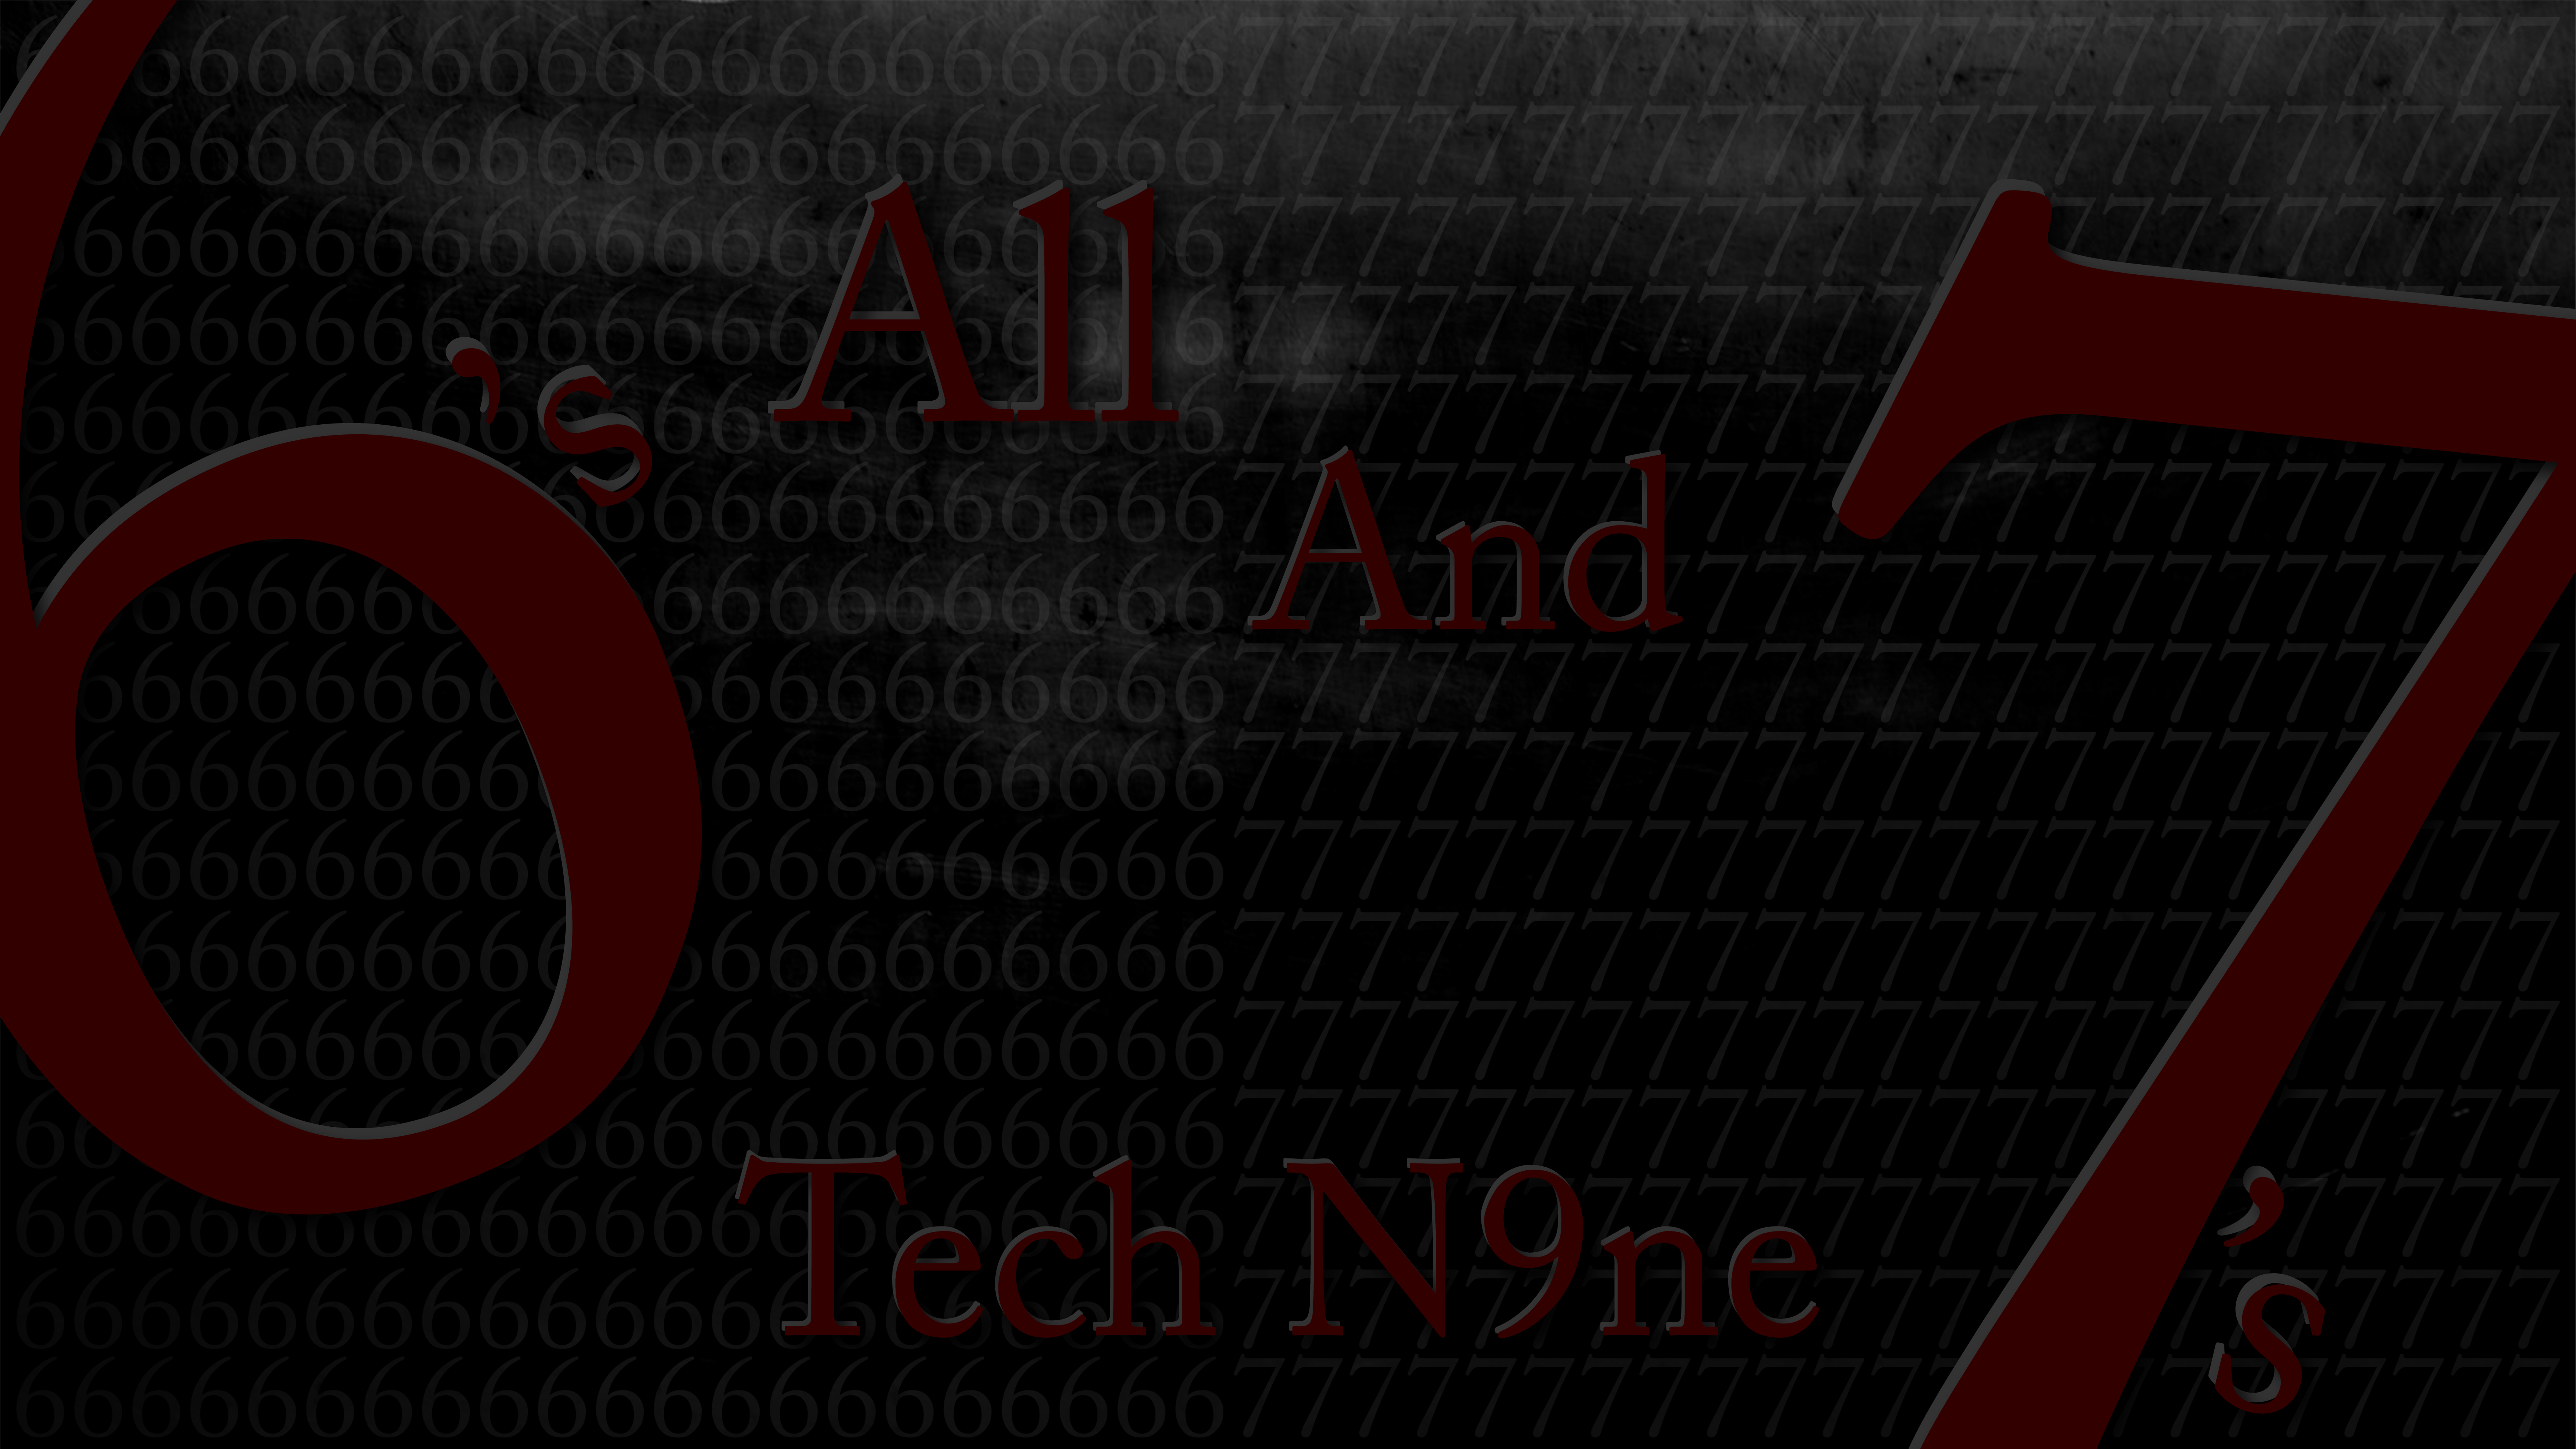 And S Desktop Wallpaper Fans Submitted Strange Music Inc